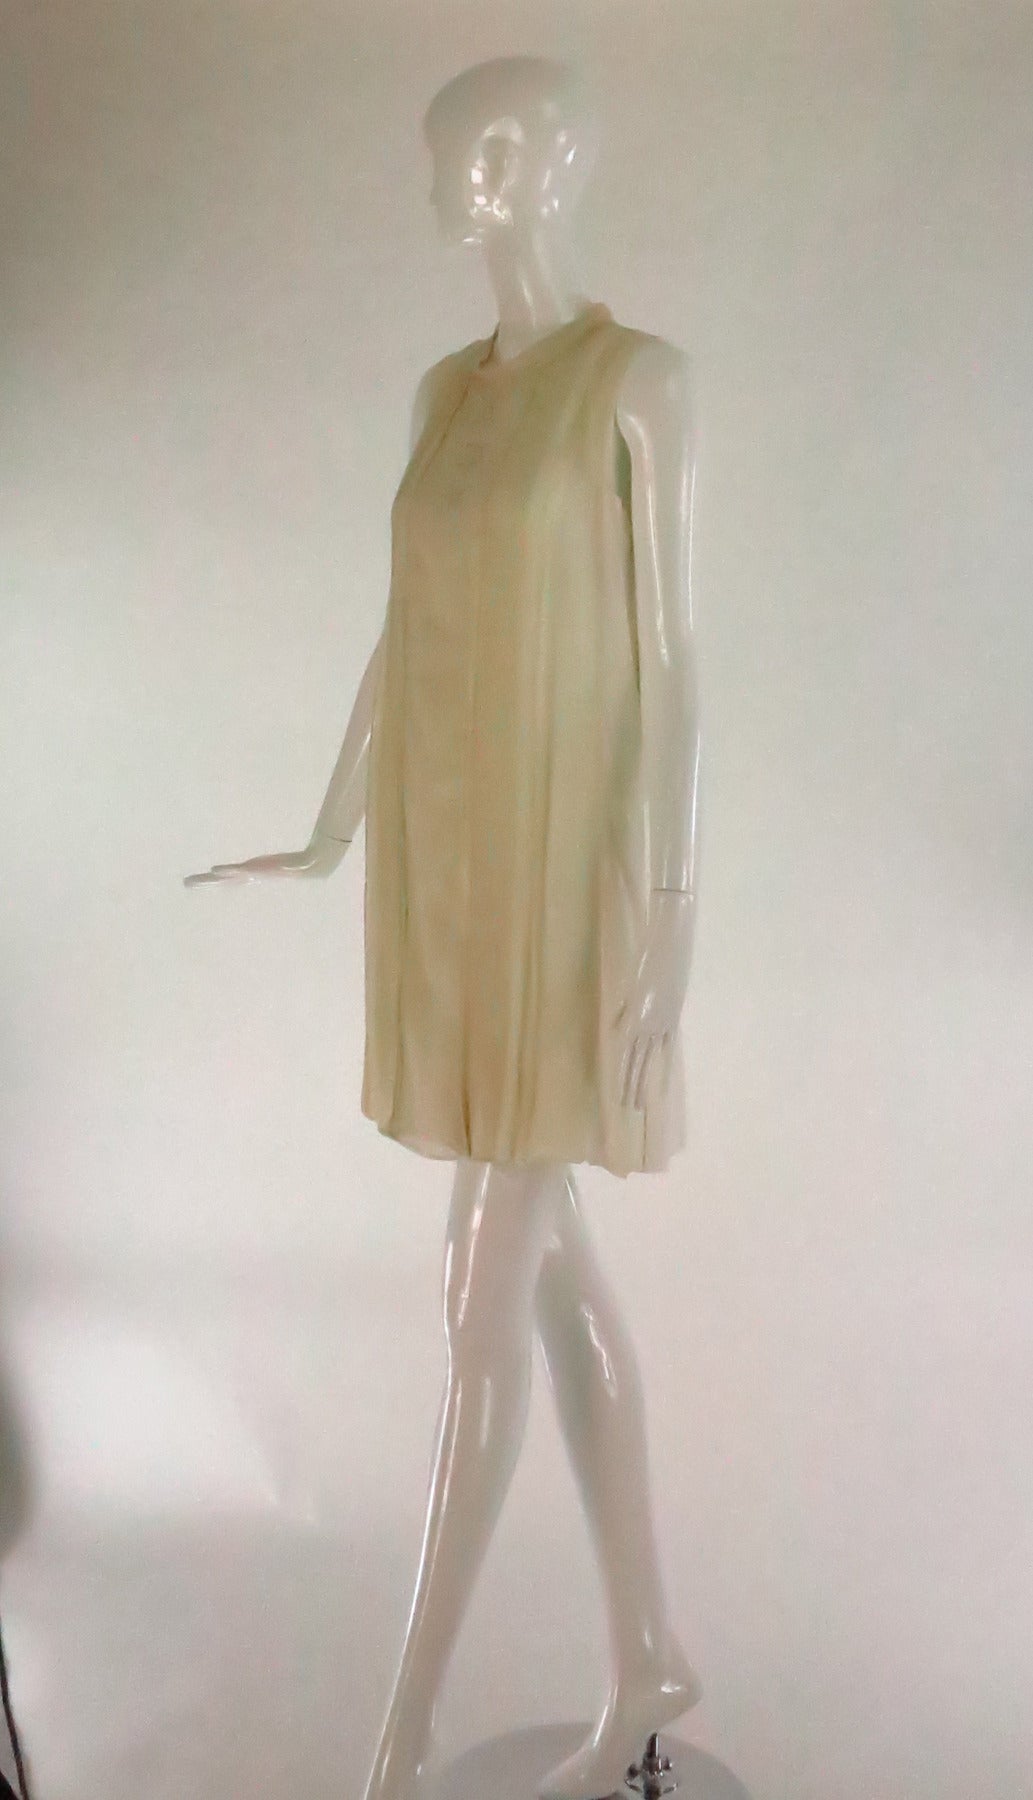 Cream chiffon and crepe sleeveless dress by Chloe...High round stand away collar, the front of the dress has tiny pin pleats at either side front to hem, the center front has a row of decorative buttons...The back of the dress has a dropped waist